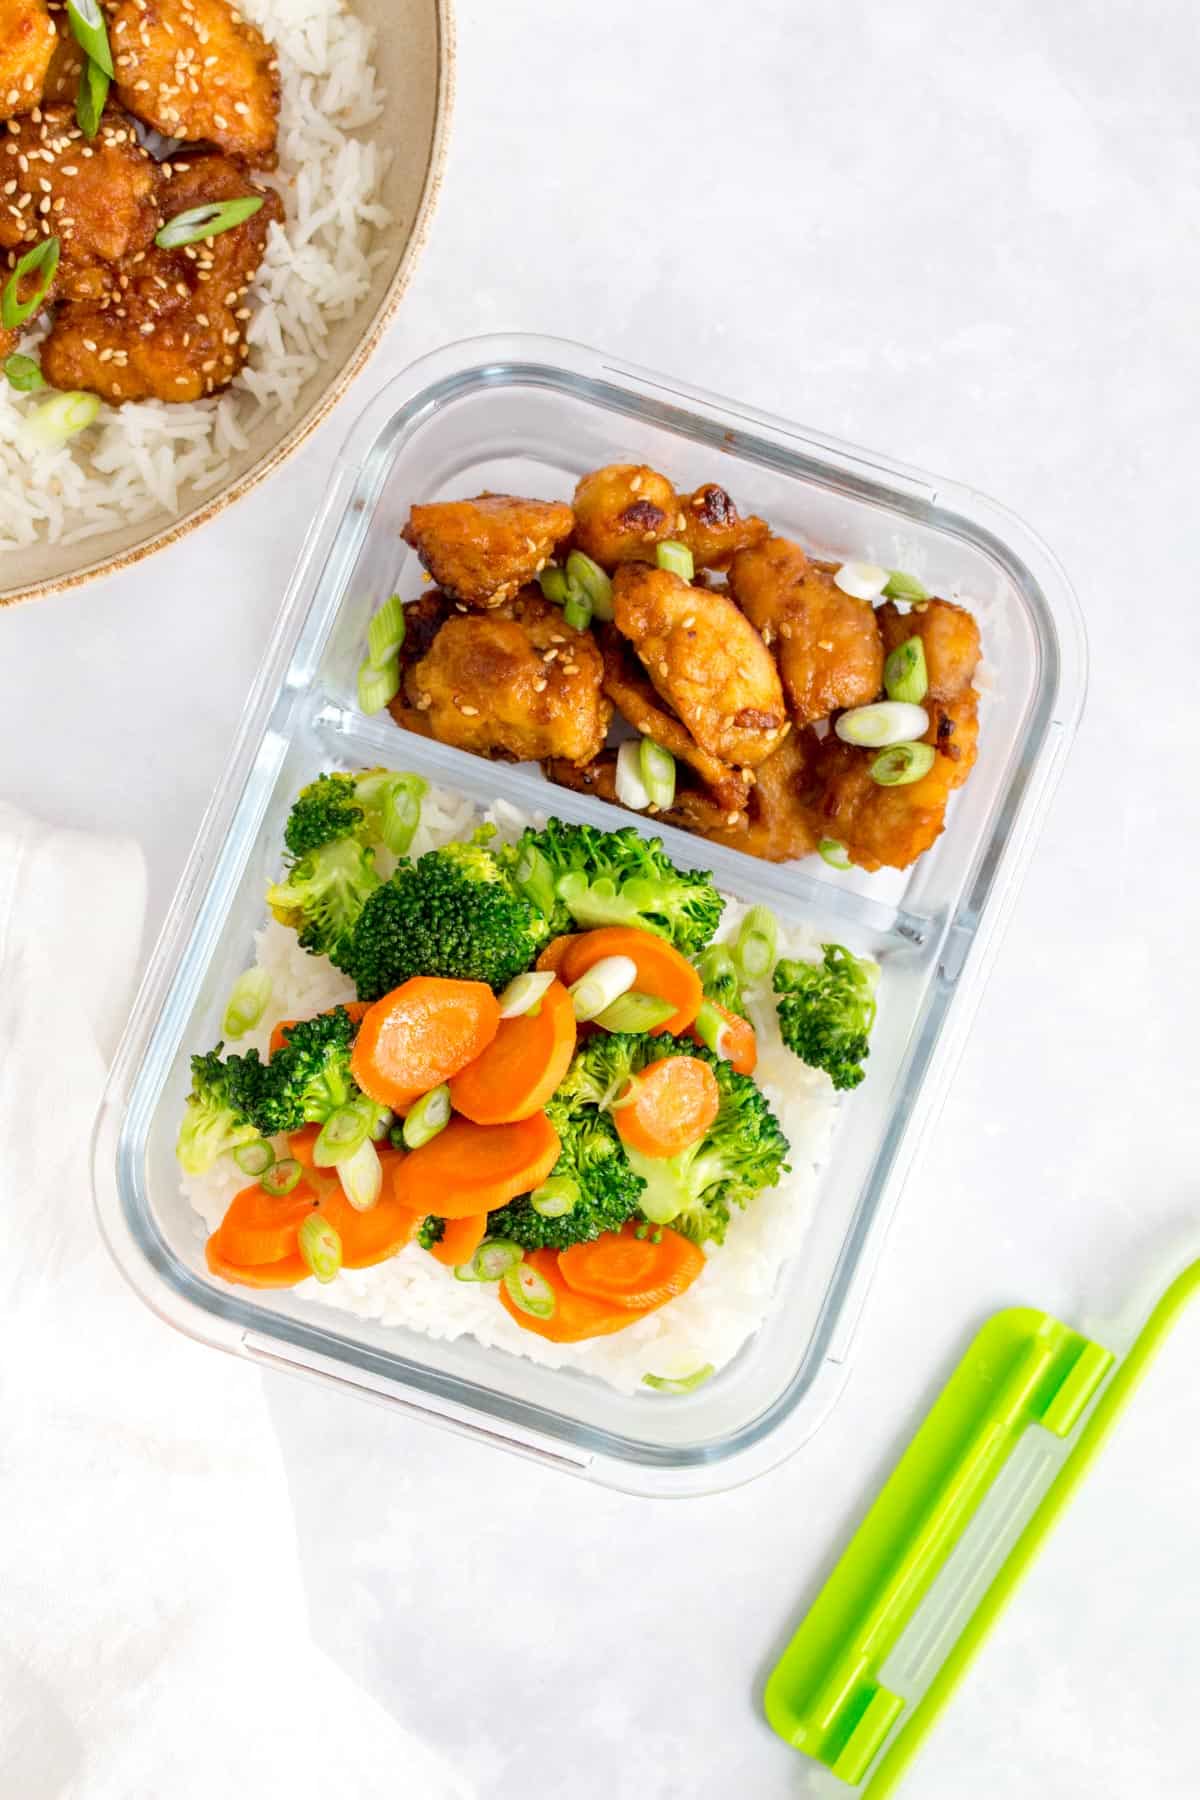 Bento box of sesame chicken in a glass meal prep container with rice and vegetables.